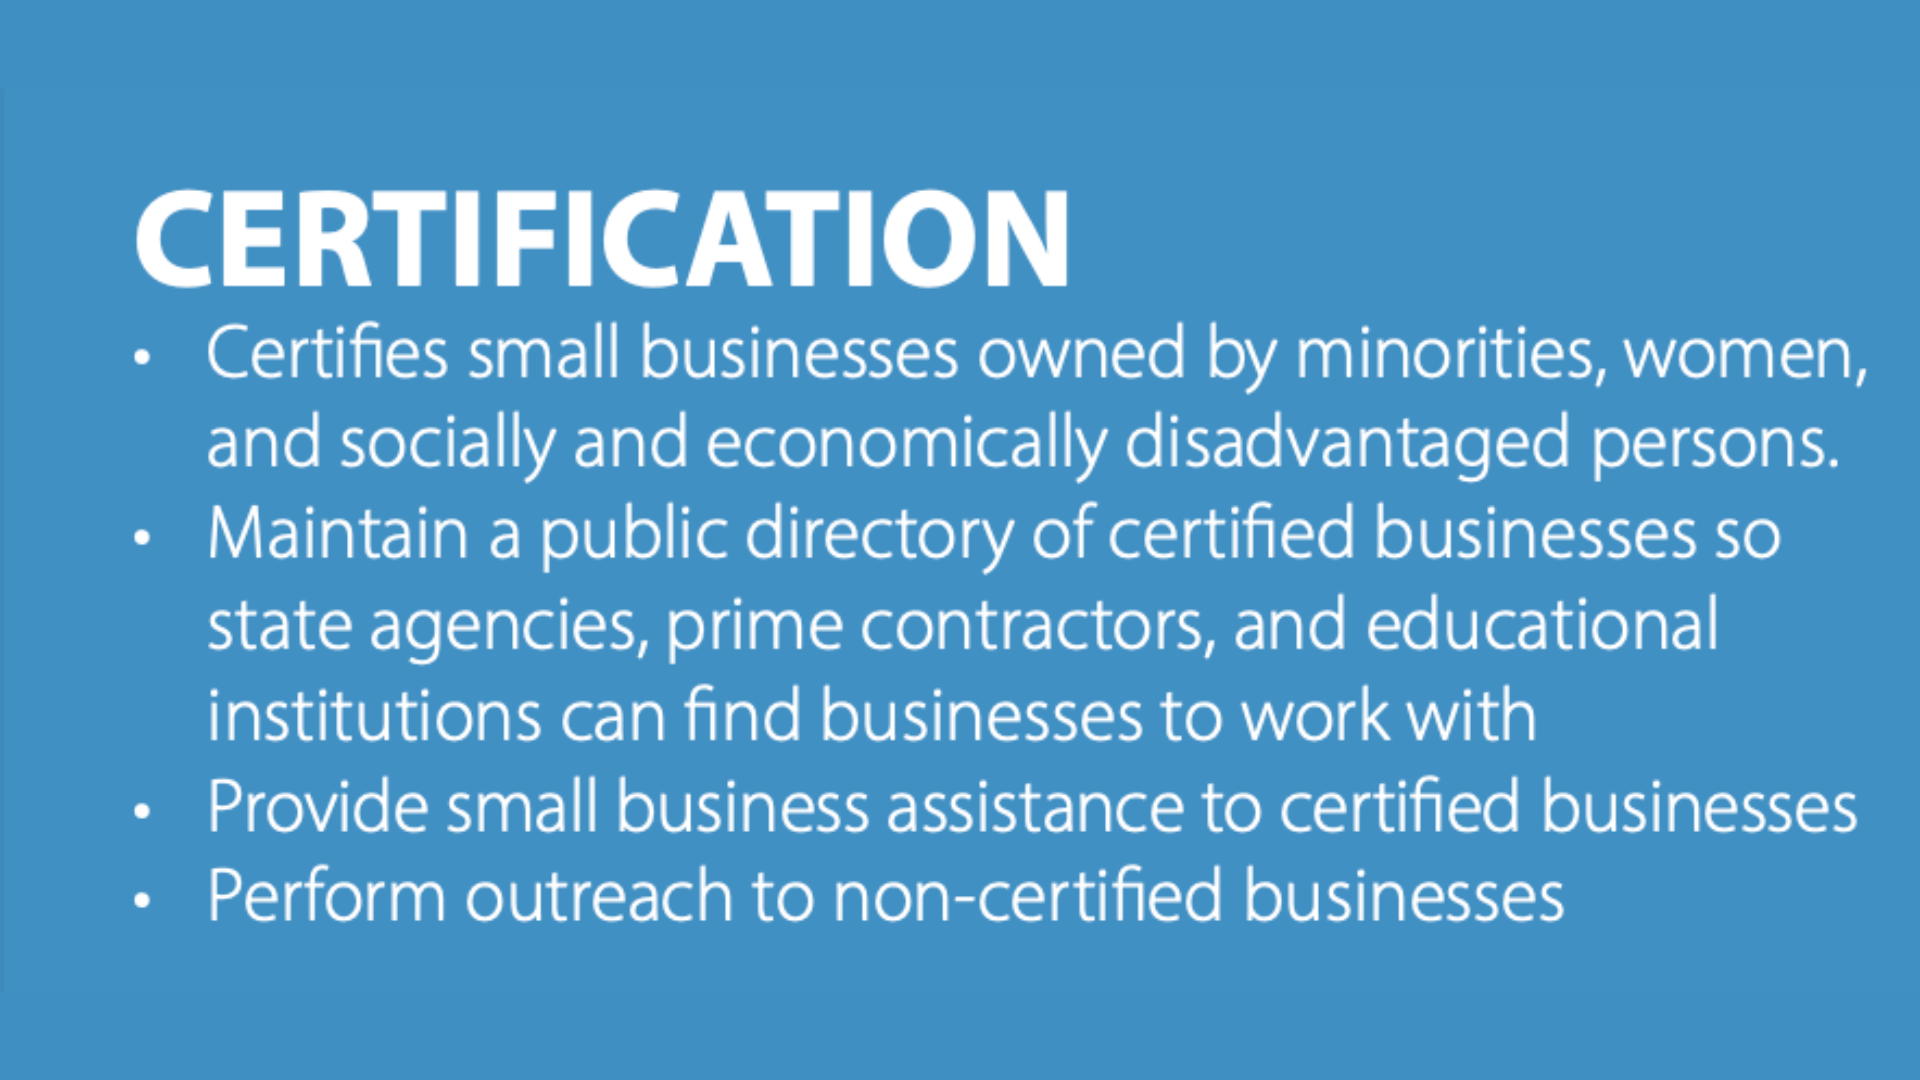 Graphic titled 'Certification' explaining the certification of small businesses owned by minorities, women, and socially and economically disadvantaged persons. It mentions maintaining a public directory of certified businesses for state agencies, prime contractors, and educational institutions to find businesses to work with. Additionally, it provides small business assistance to certified businesses and performs outreach to non-certified businesses.